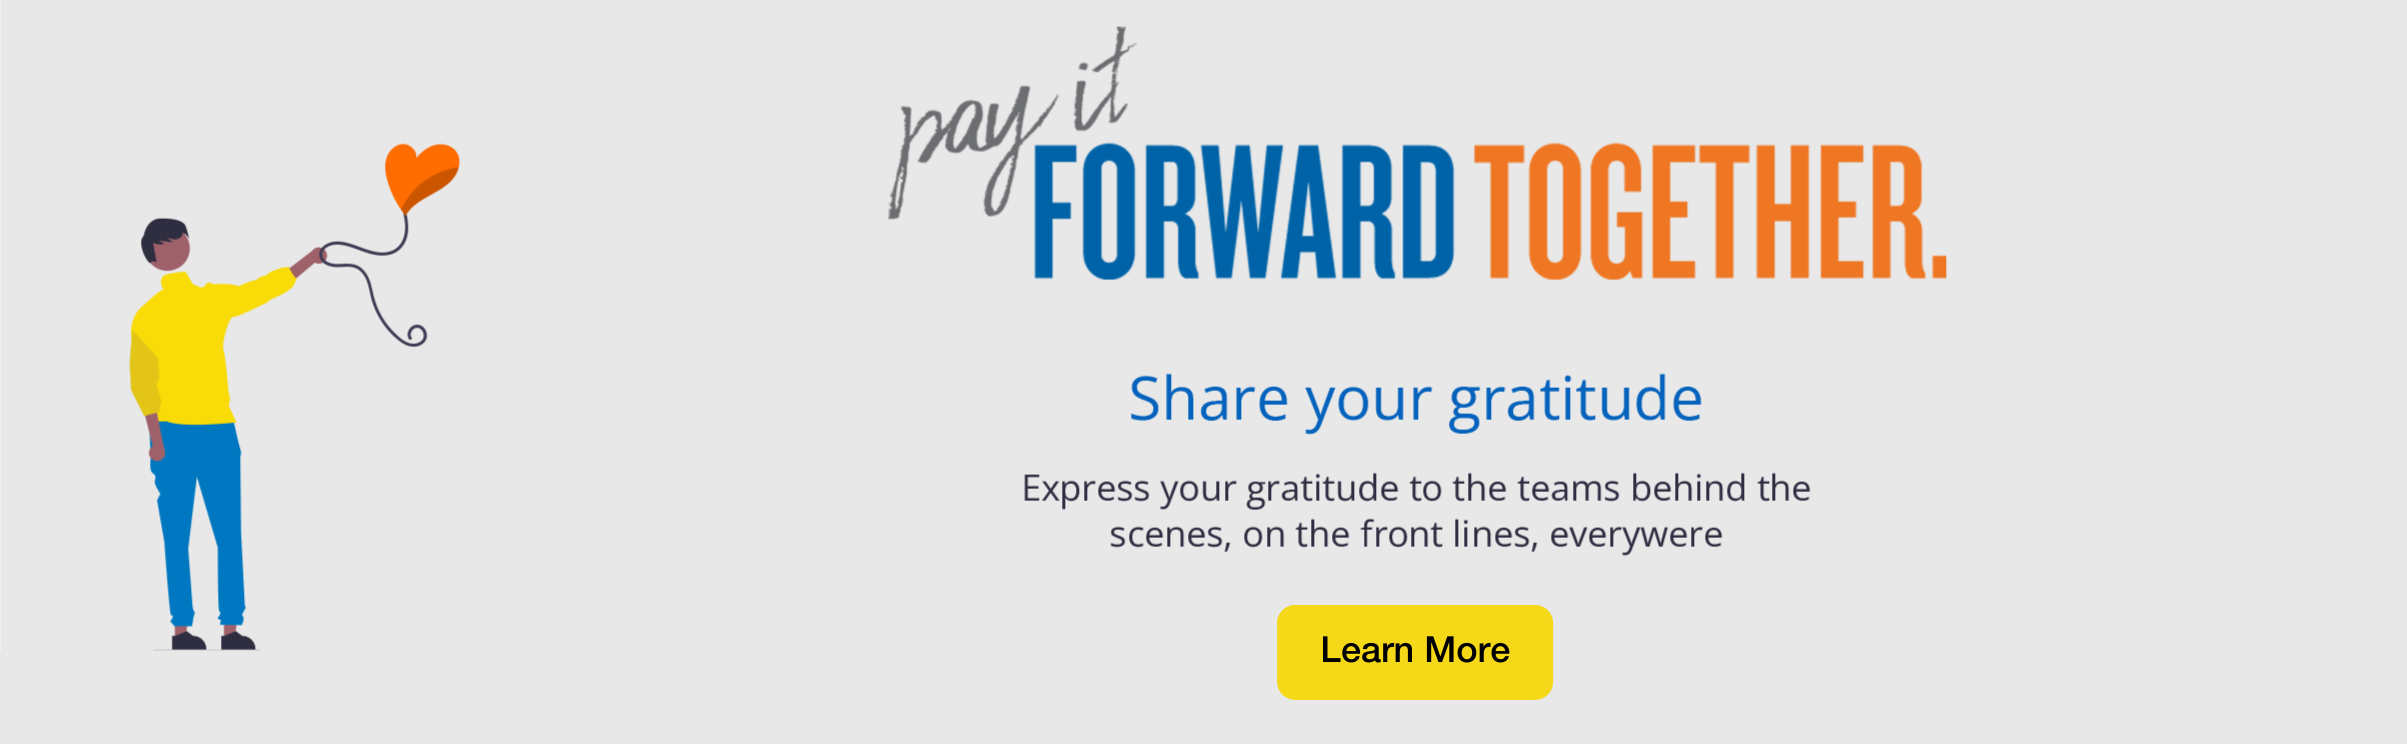 Pay It Forward Together